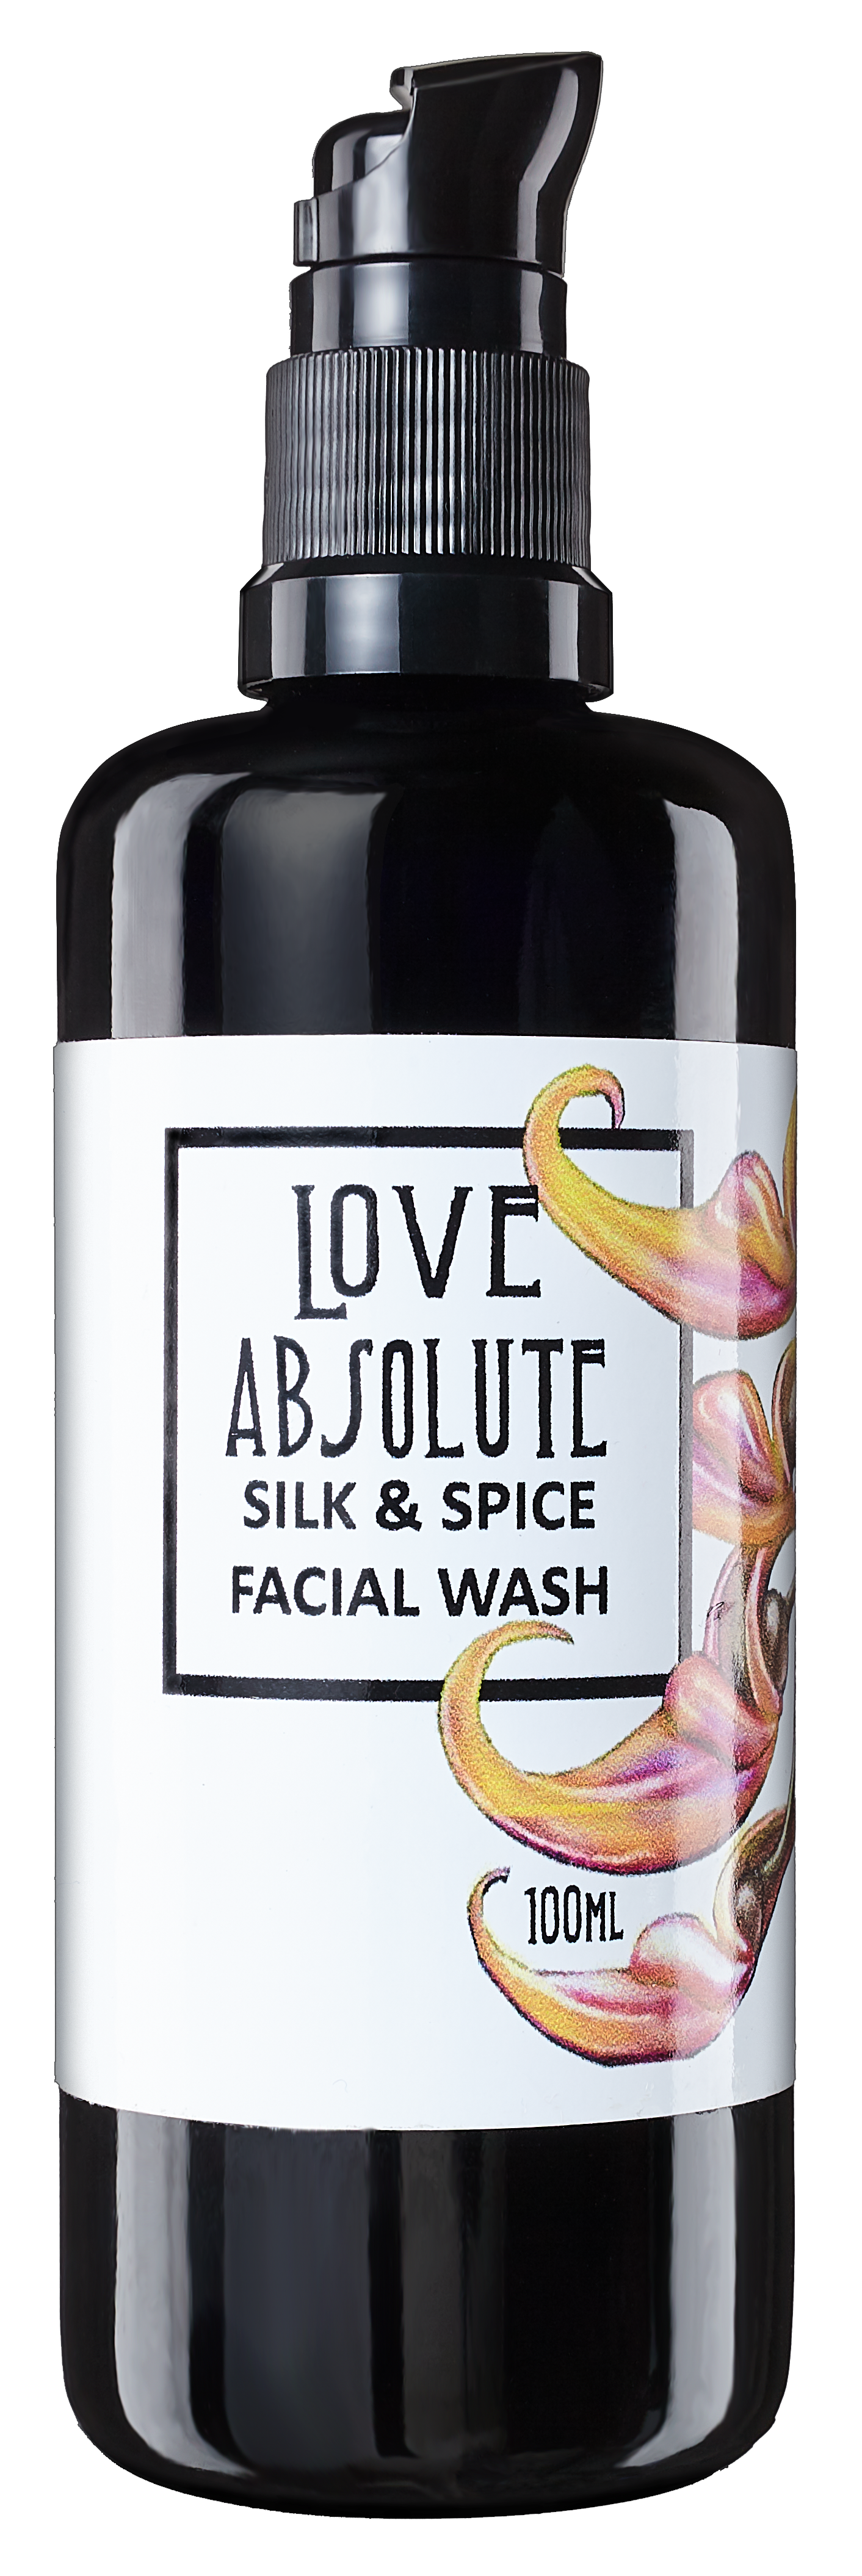 Silk and Spice Facial Wash